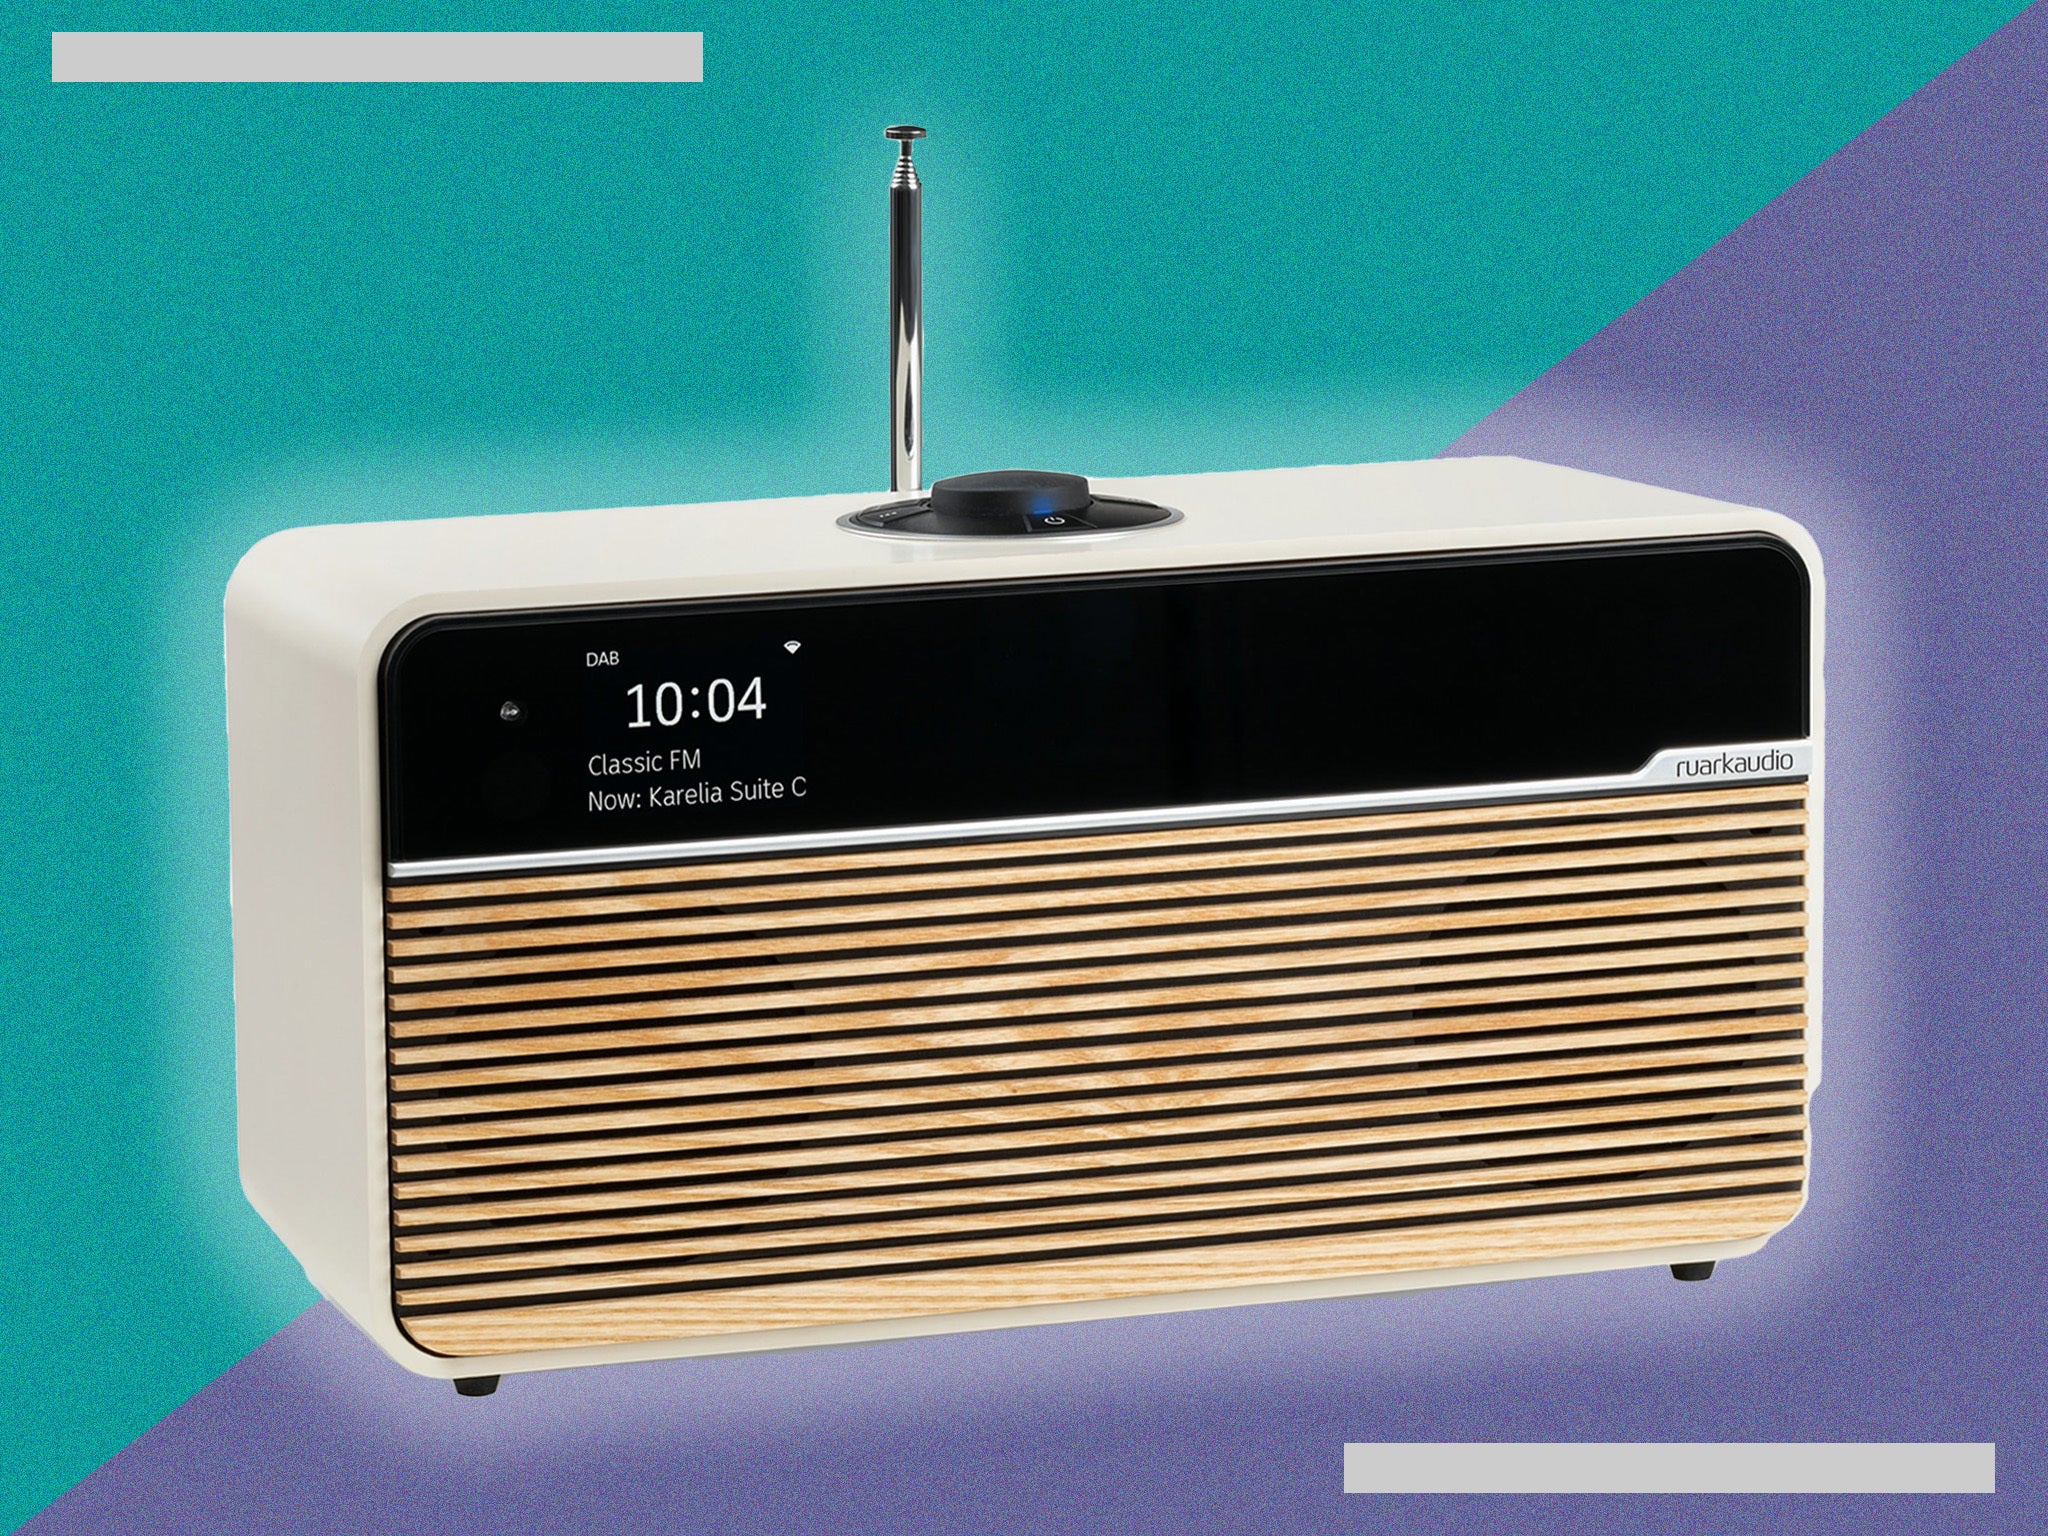 Ruark R2 mk4 review: High-quality sound and beautiful design | The